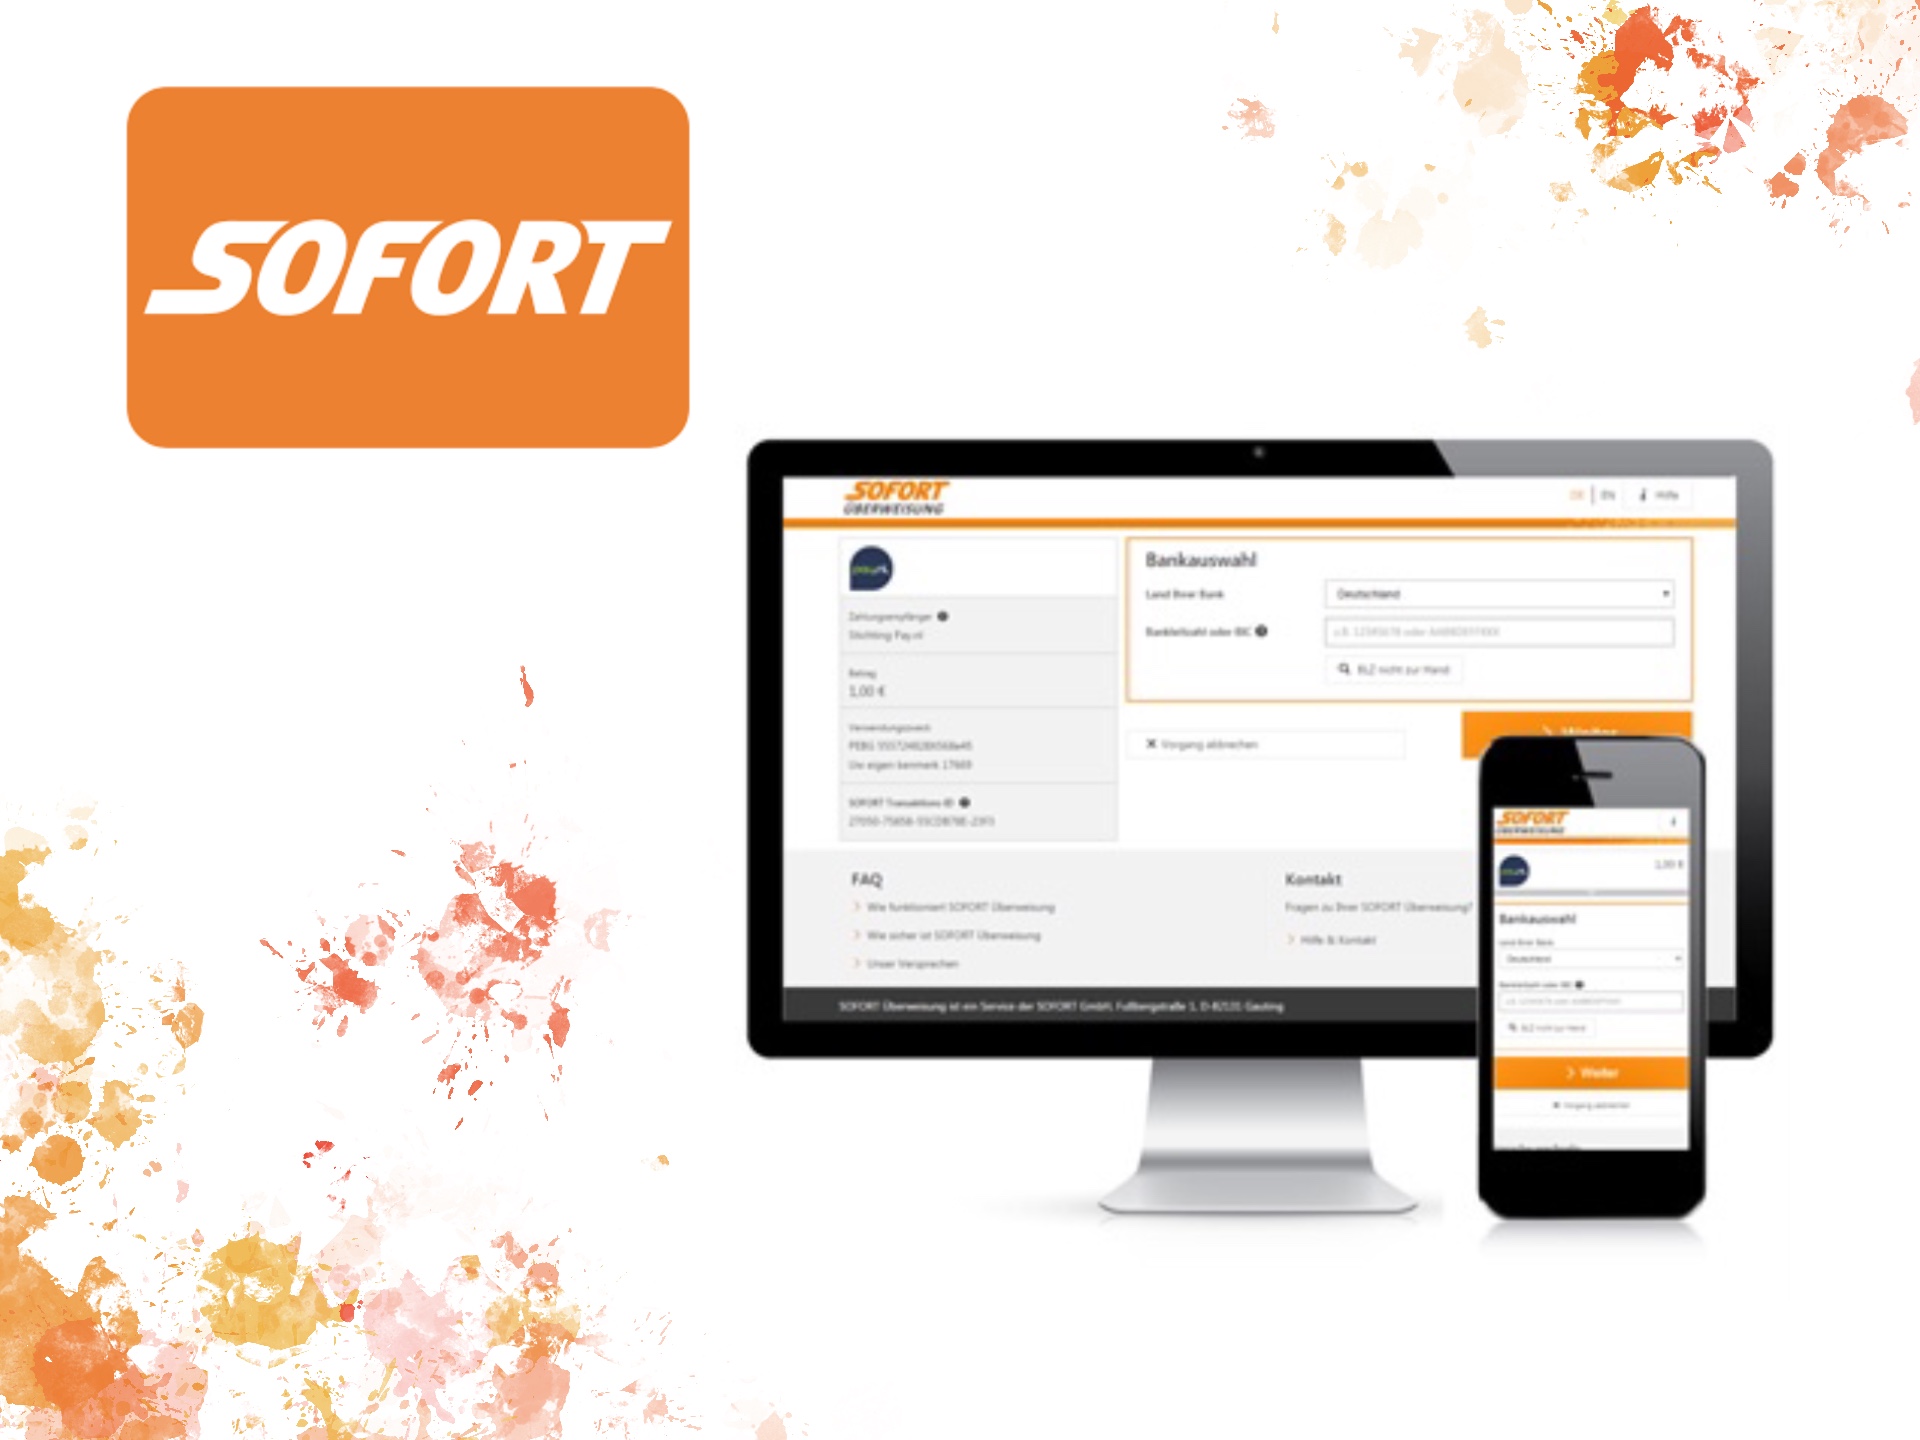 Operations with Sofort can be profitable as it has low fees.